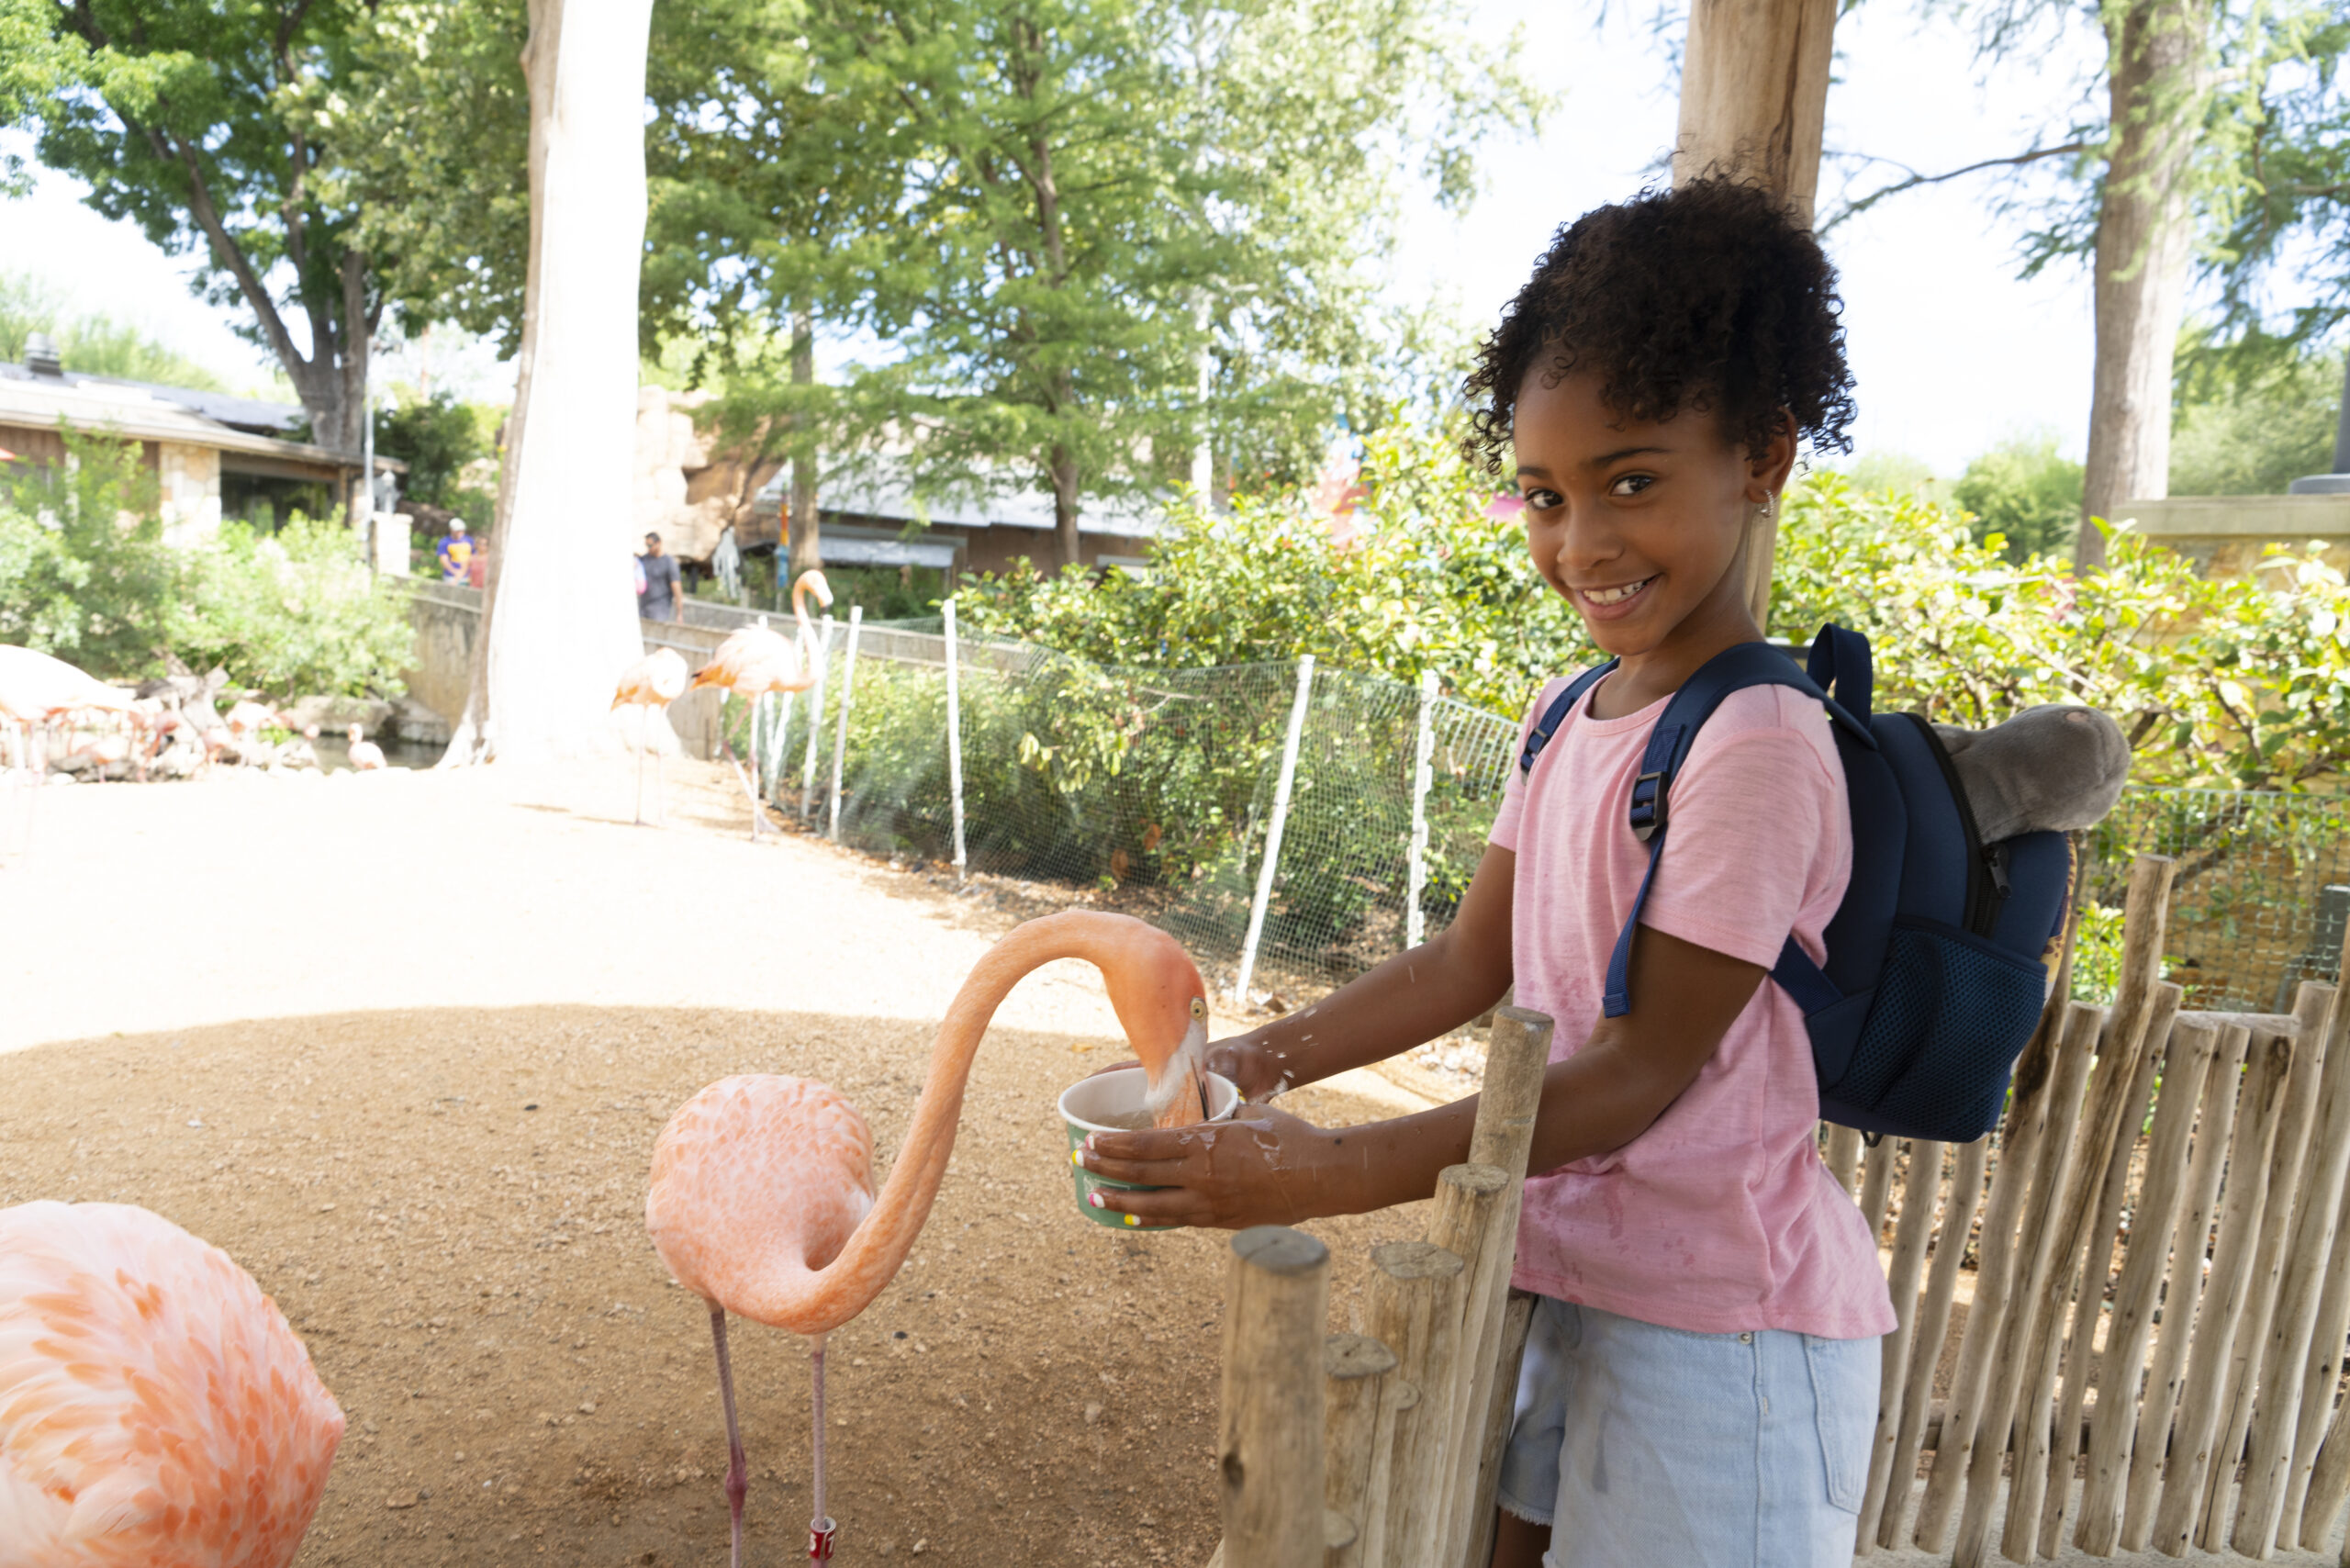 A young guest feeding a Caribbean flamingo in the Flamingo Mingle area of the zoo.